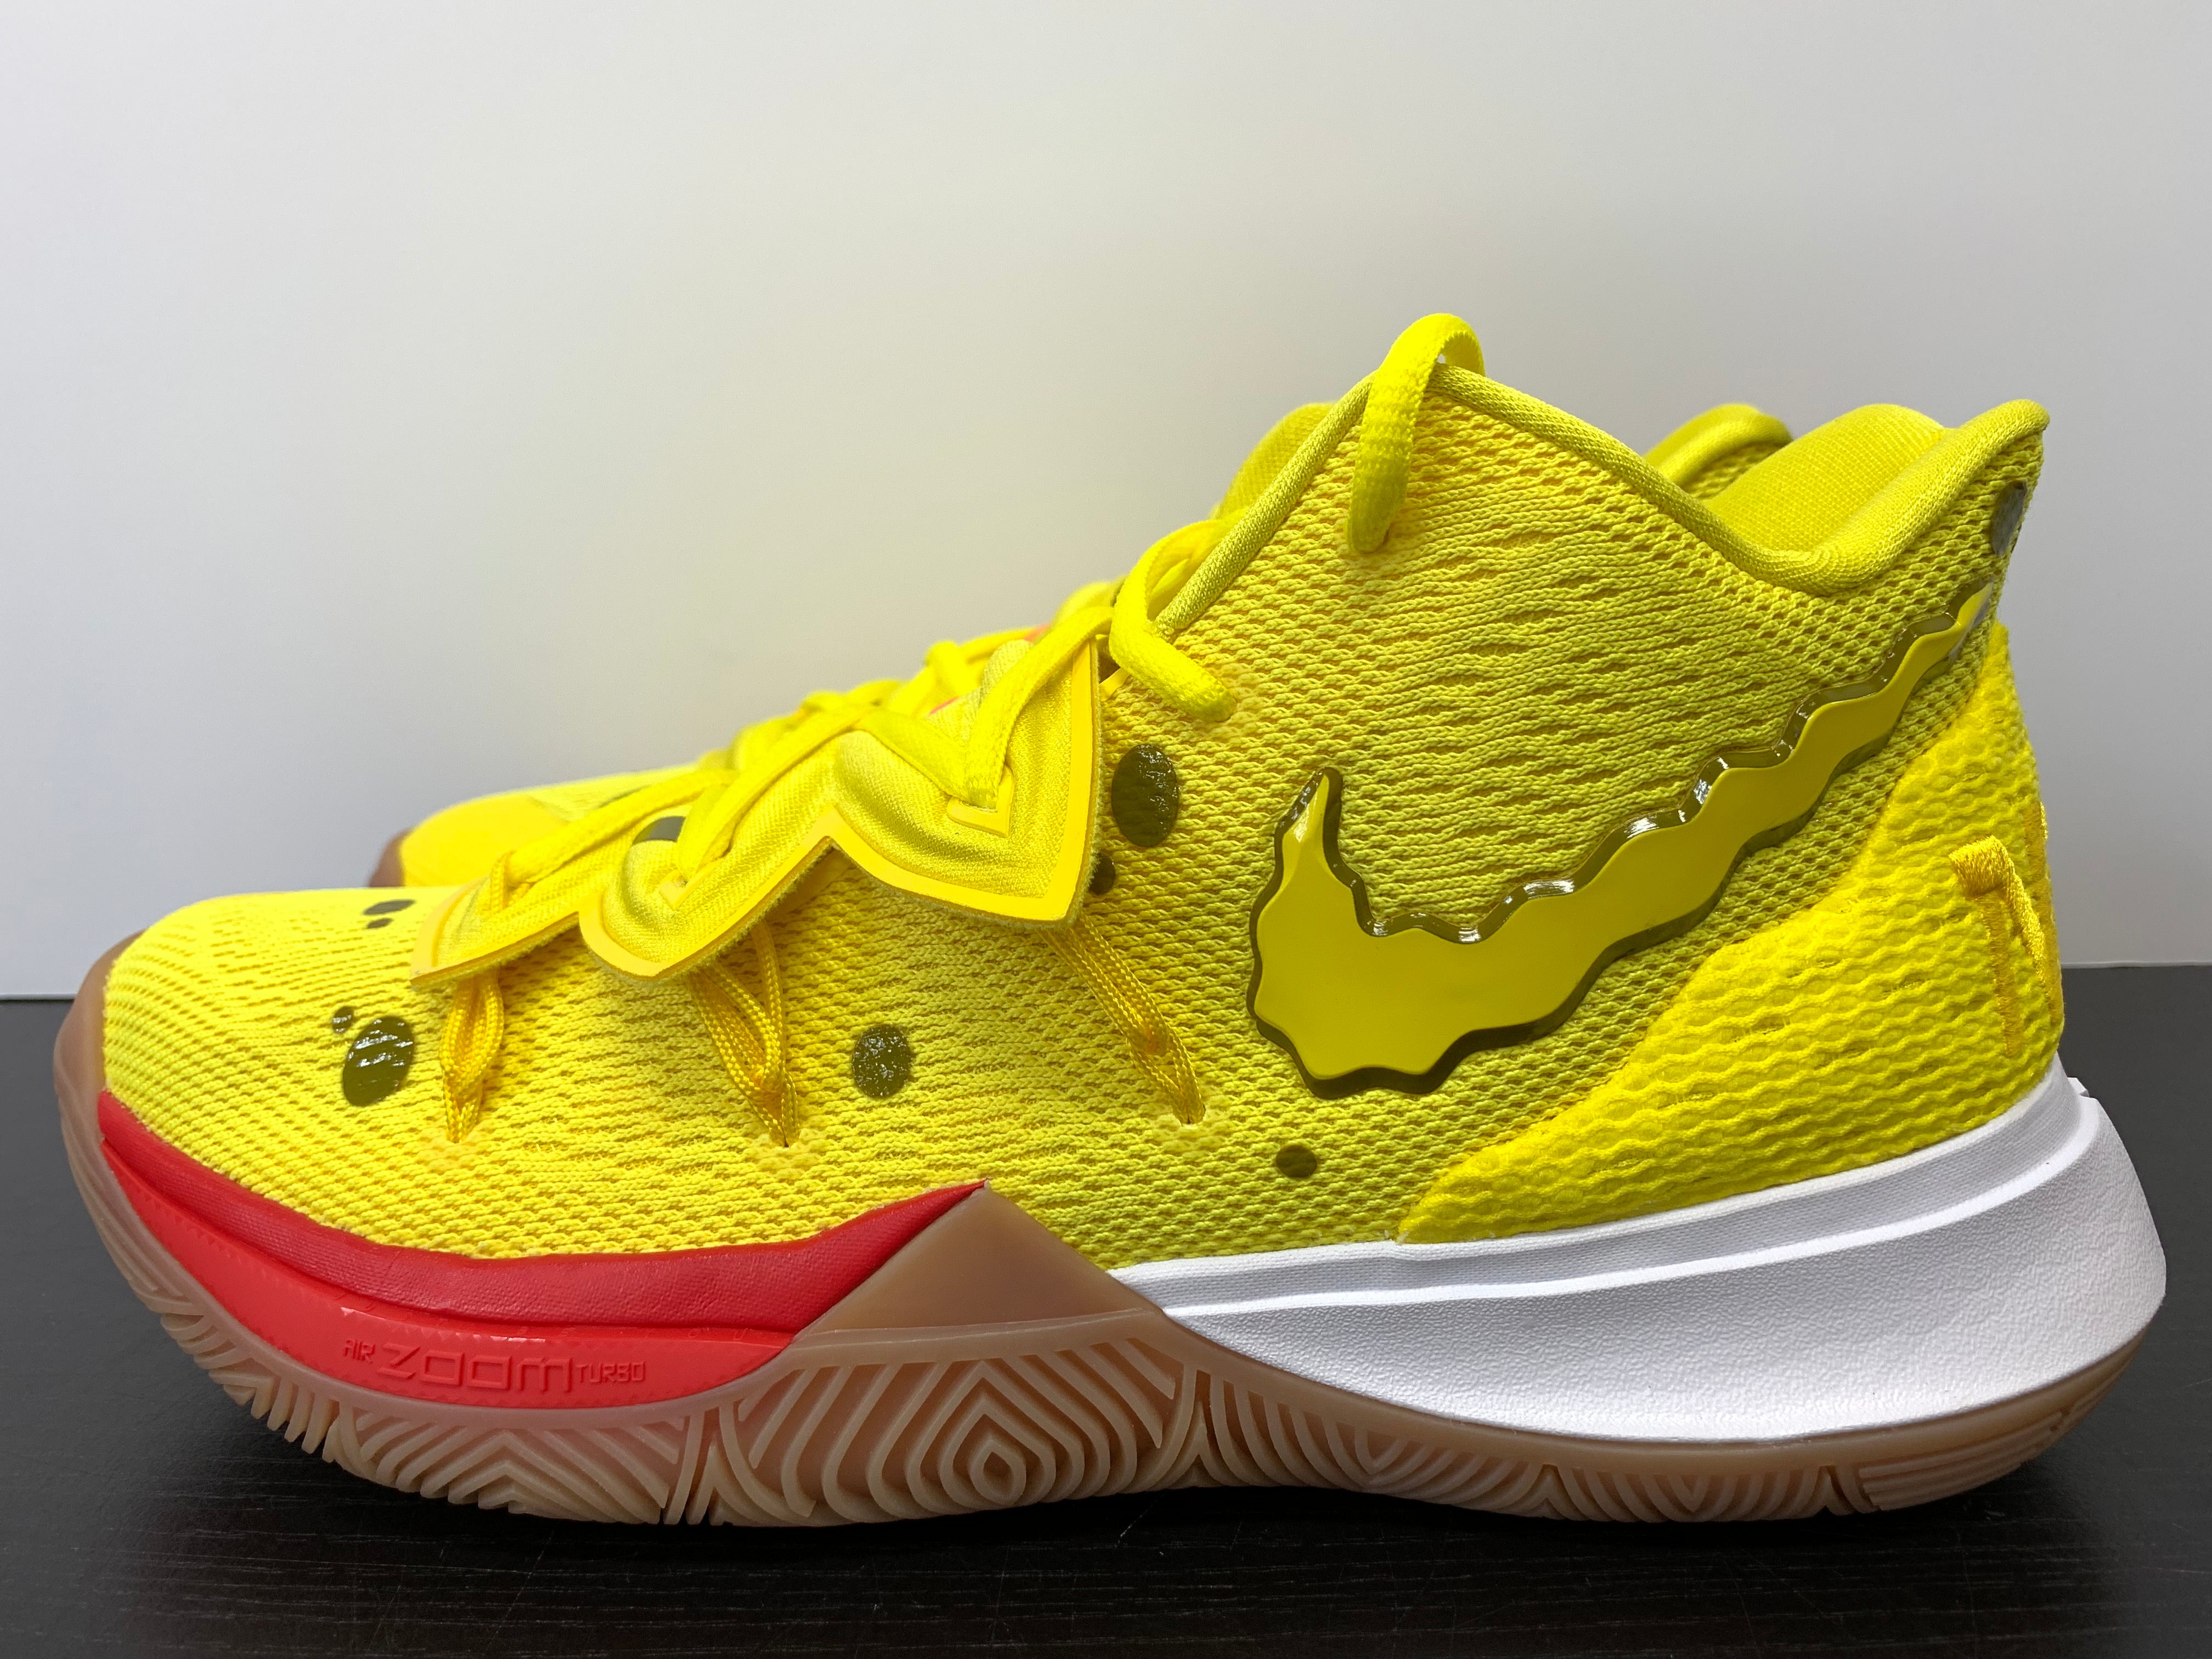 The Best Sales for Nike Kyrie 5 x Spongebob Active